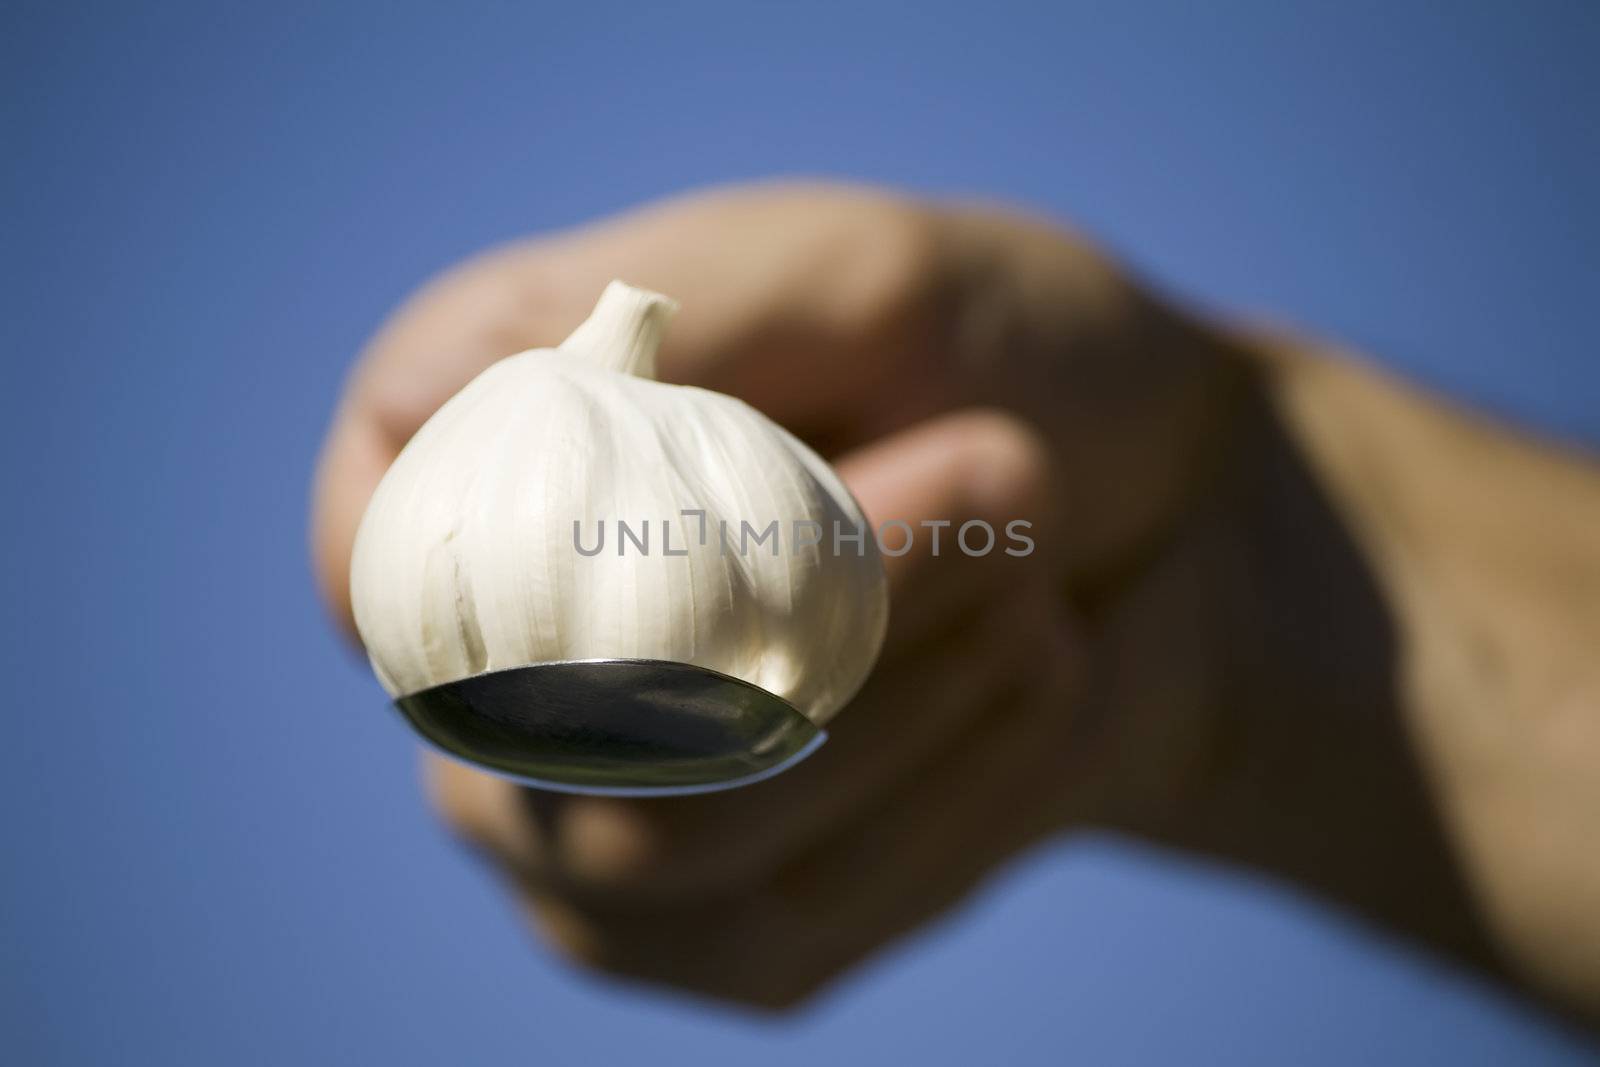 garlic and spoon against blue sky by nubephoto